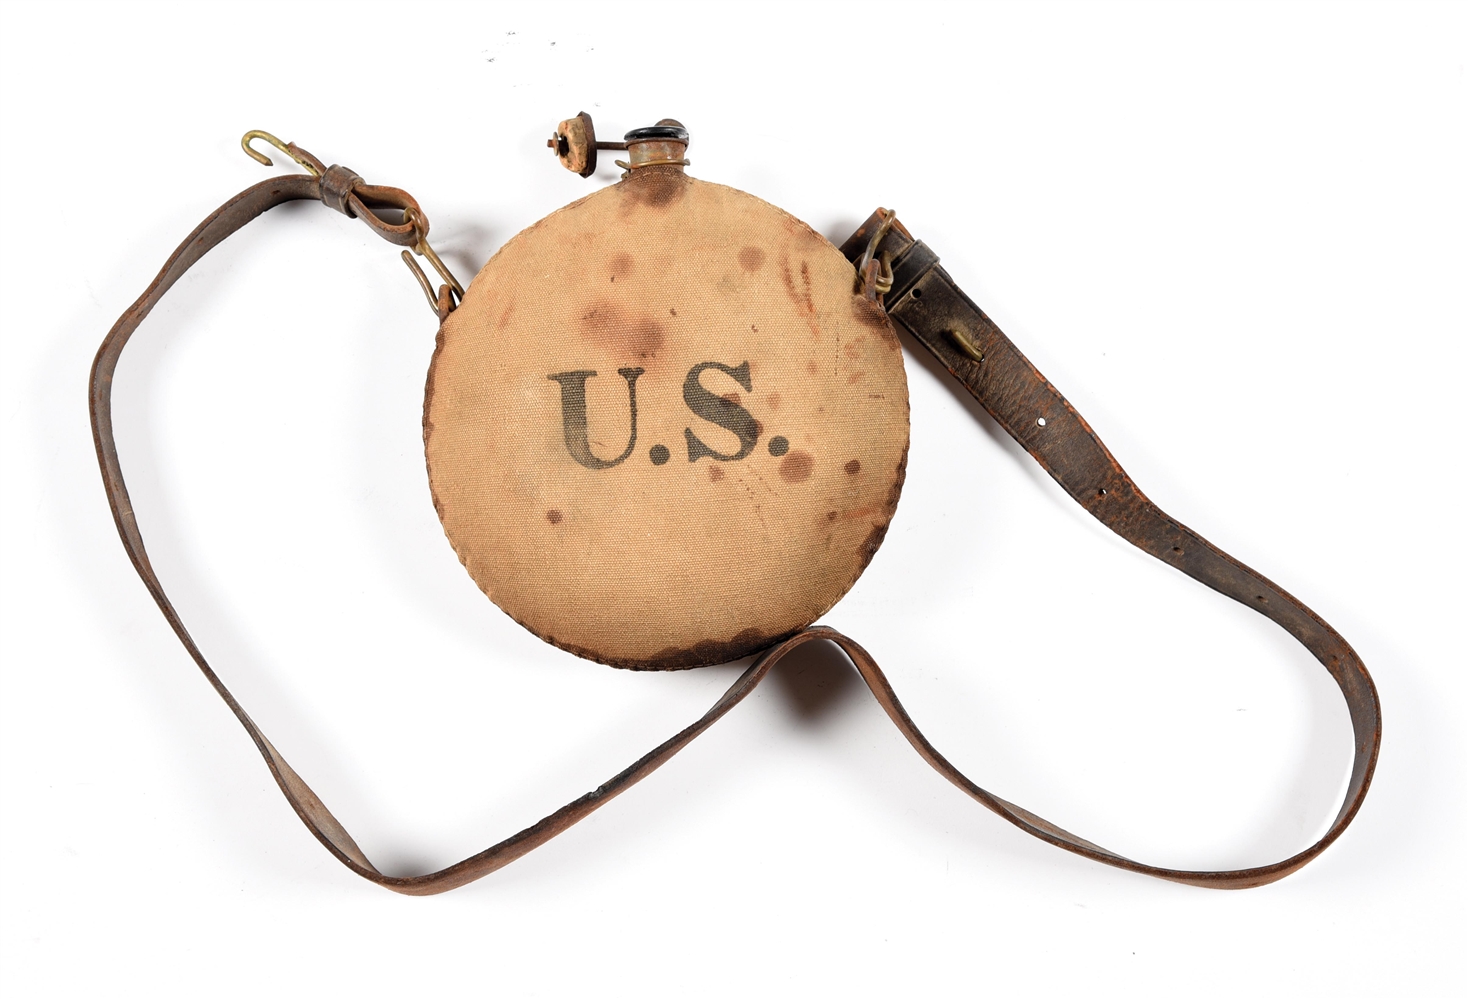 US ARMY PATTERN 1878 CANTEEN.